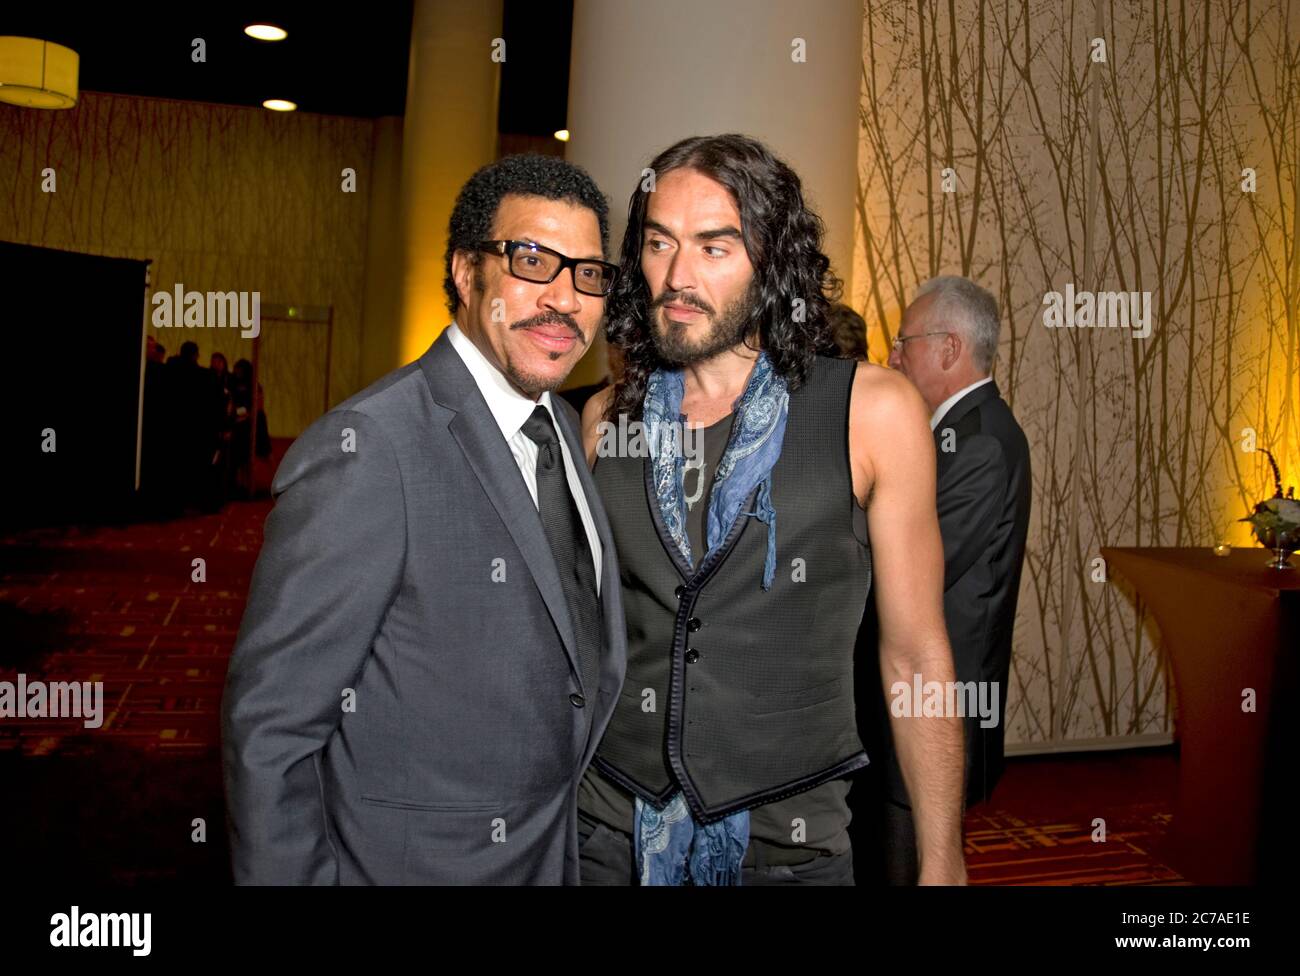 Lionel richie greets Russel Brand at the premiere party for Mexico The Royal Tour screening in Los Angeles 9/21/11 Stock Photo